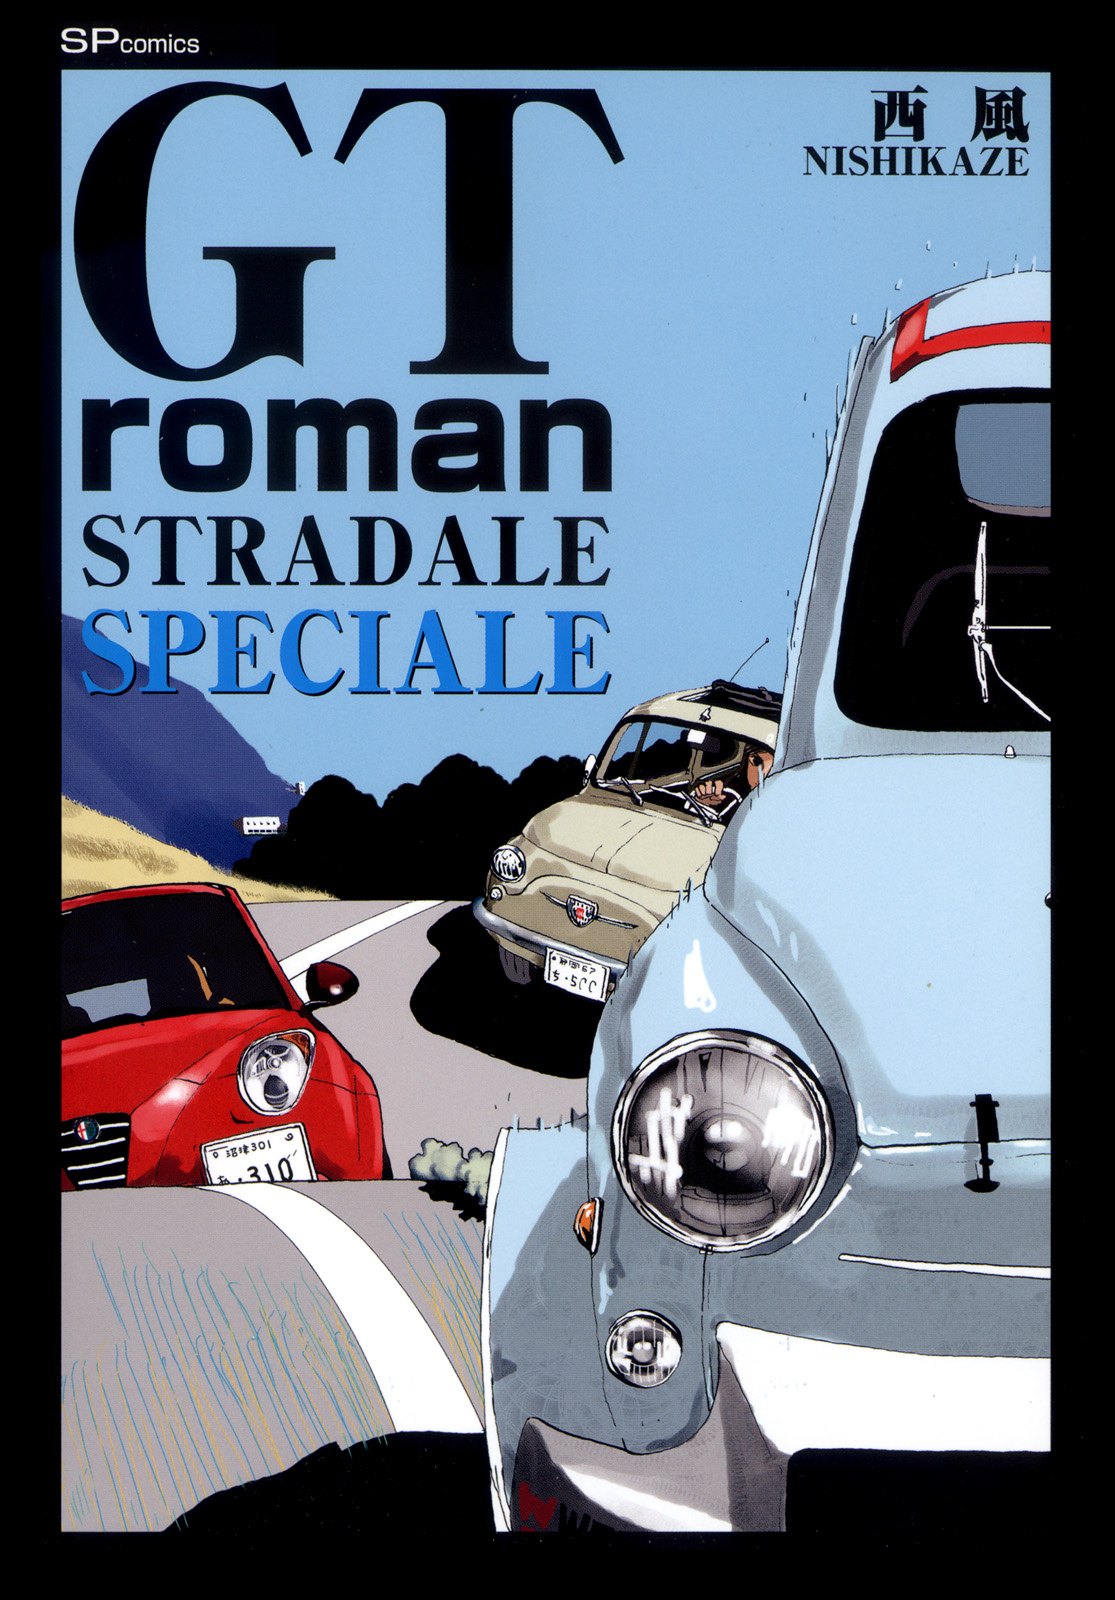 GT Roman STRADALE SPECIALE（最新刊） - 西風 - 漫画・ラノベ（小説 